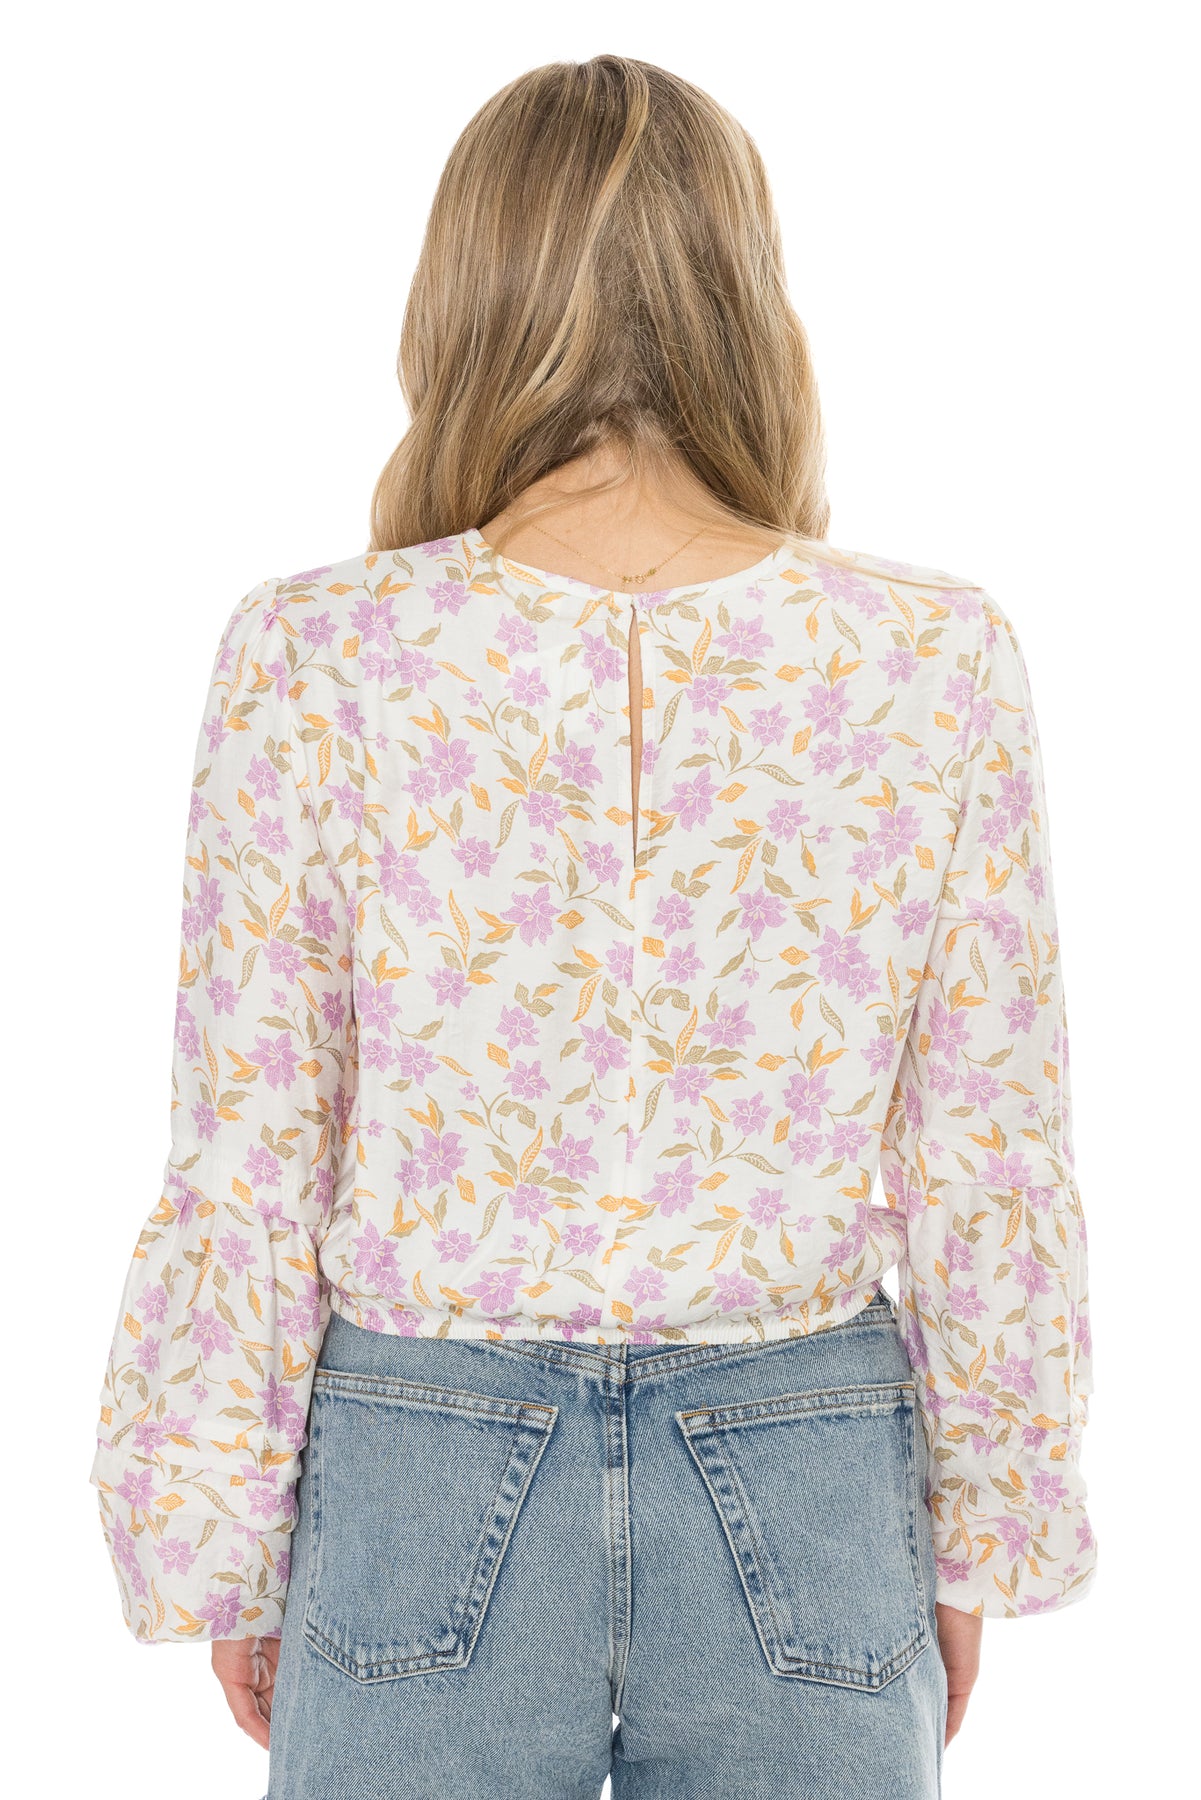 Nylah Floral Top – Shop Common Thread